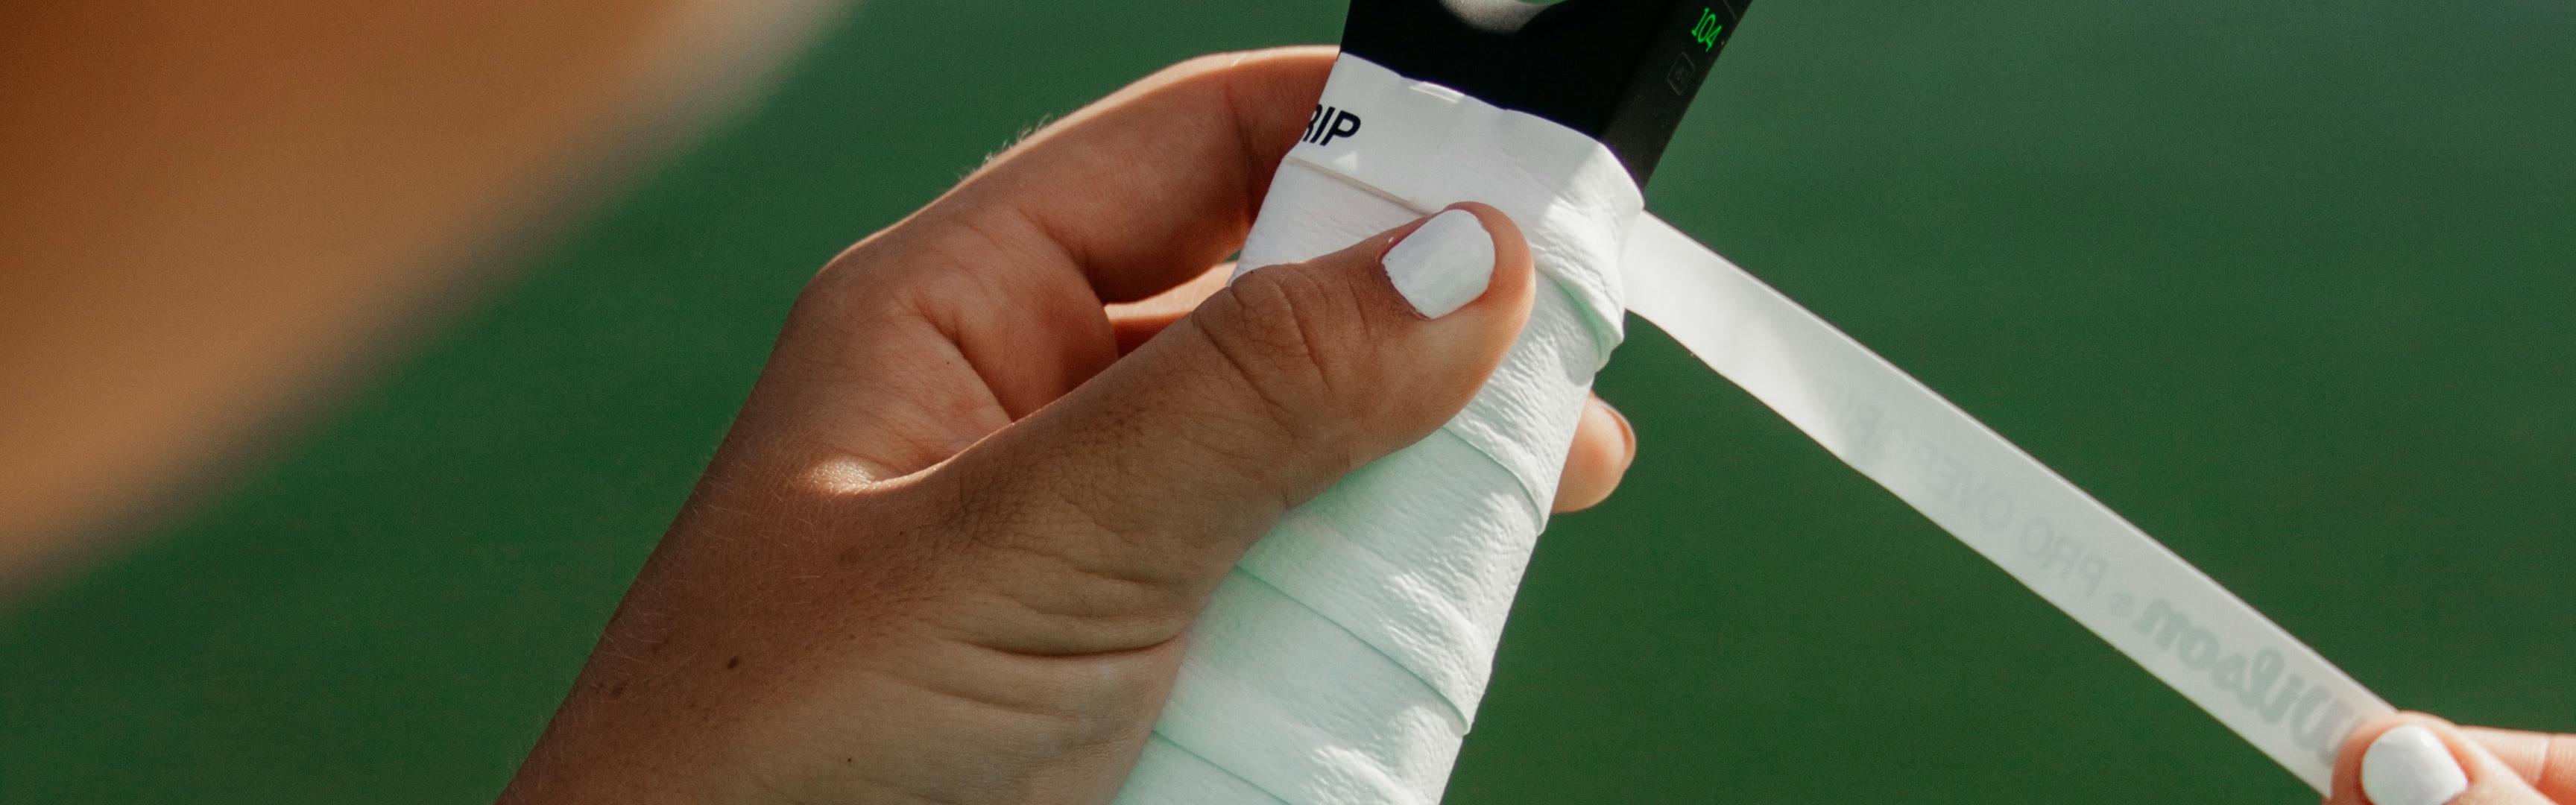 A woman wraps white grip tape around her racquet handle.